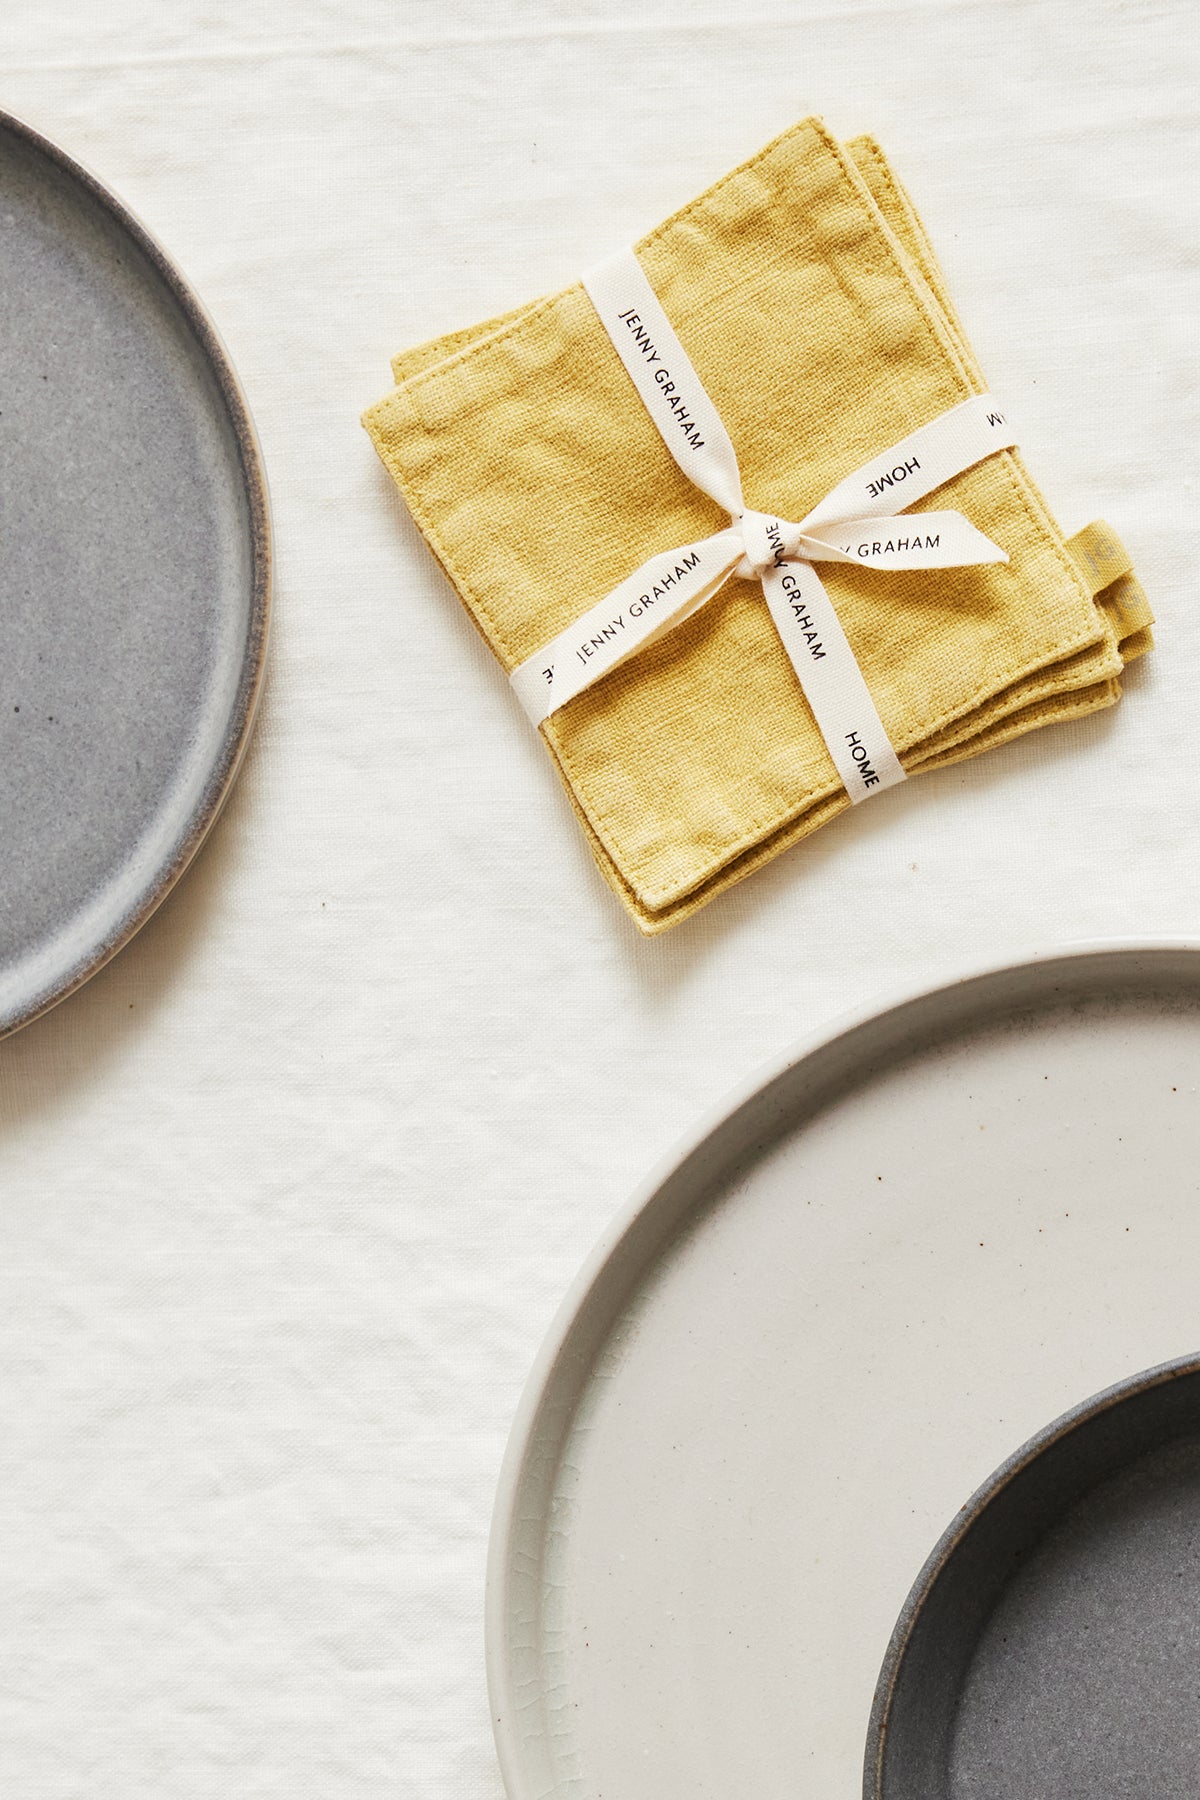   A set of Jenny Graham Home linen coasters (set of 4) on a white surface. 